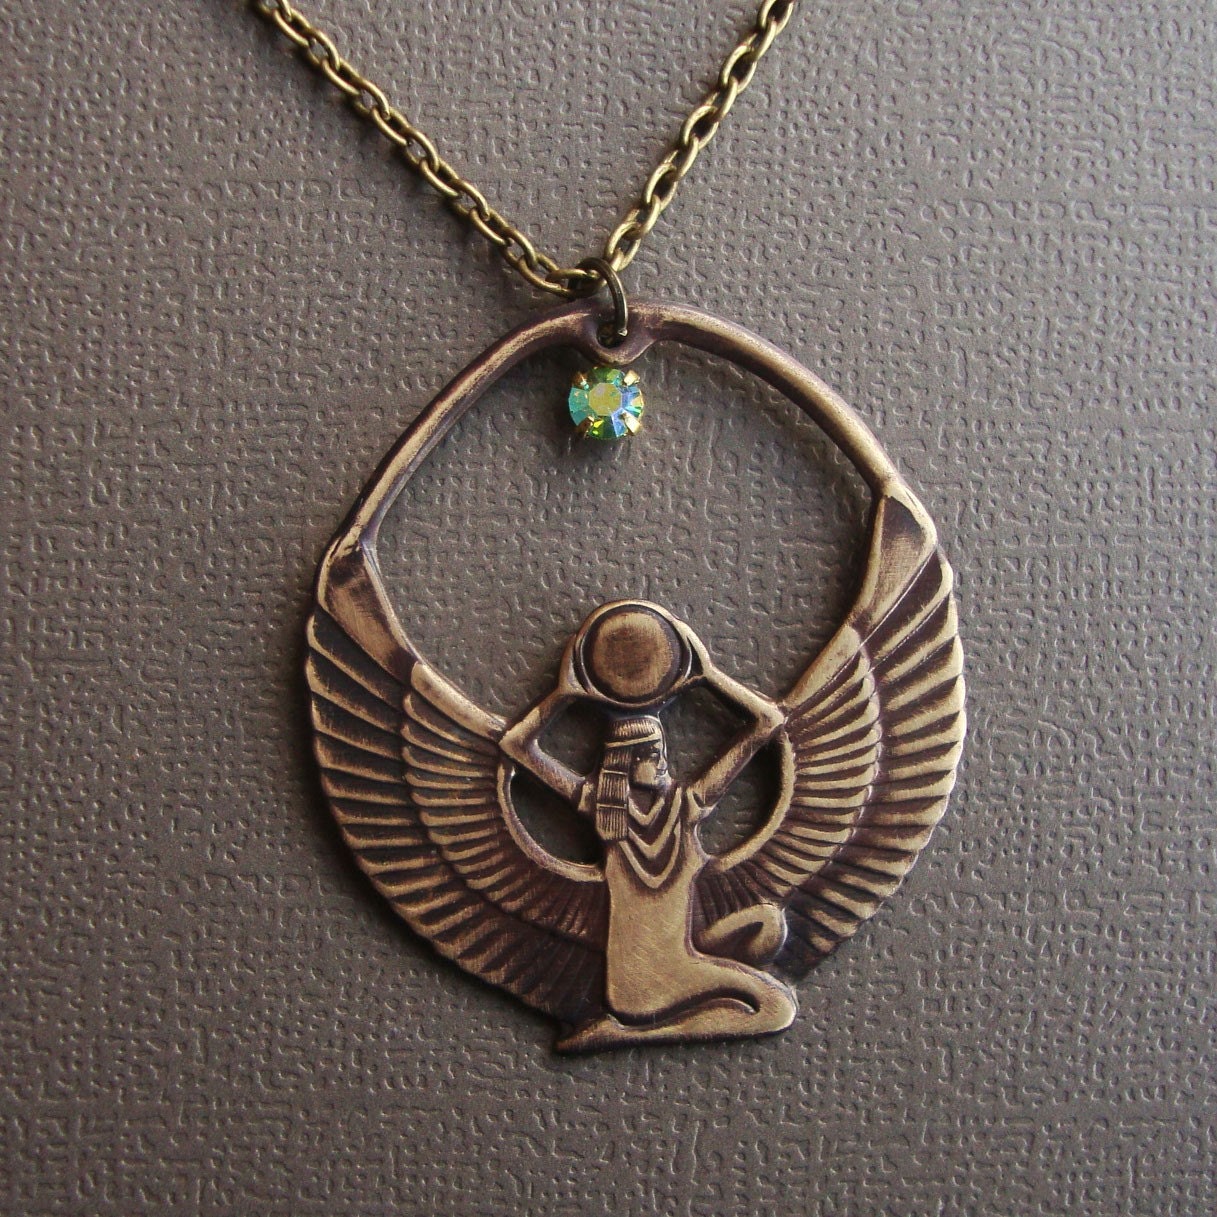 Egyptian Goddess Isis Necklace with Handmade Dark Antique